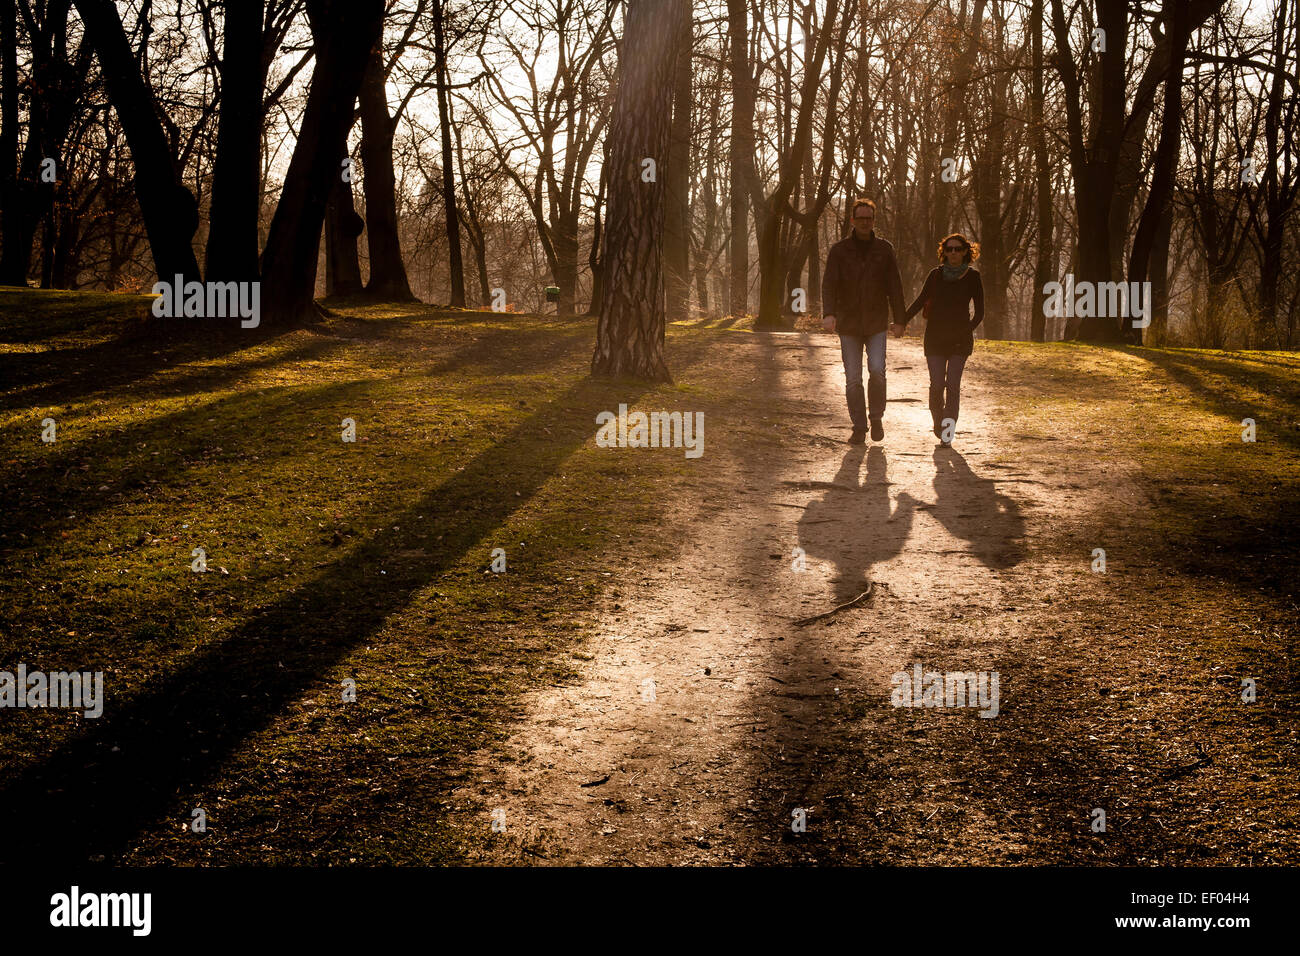 Middle aged couple walking through a park. Stock Photo